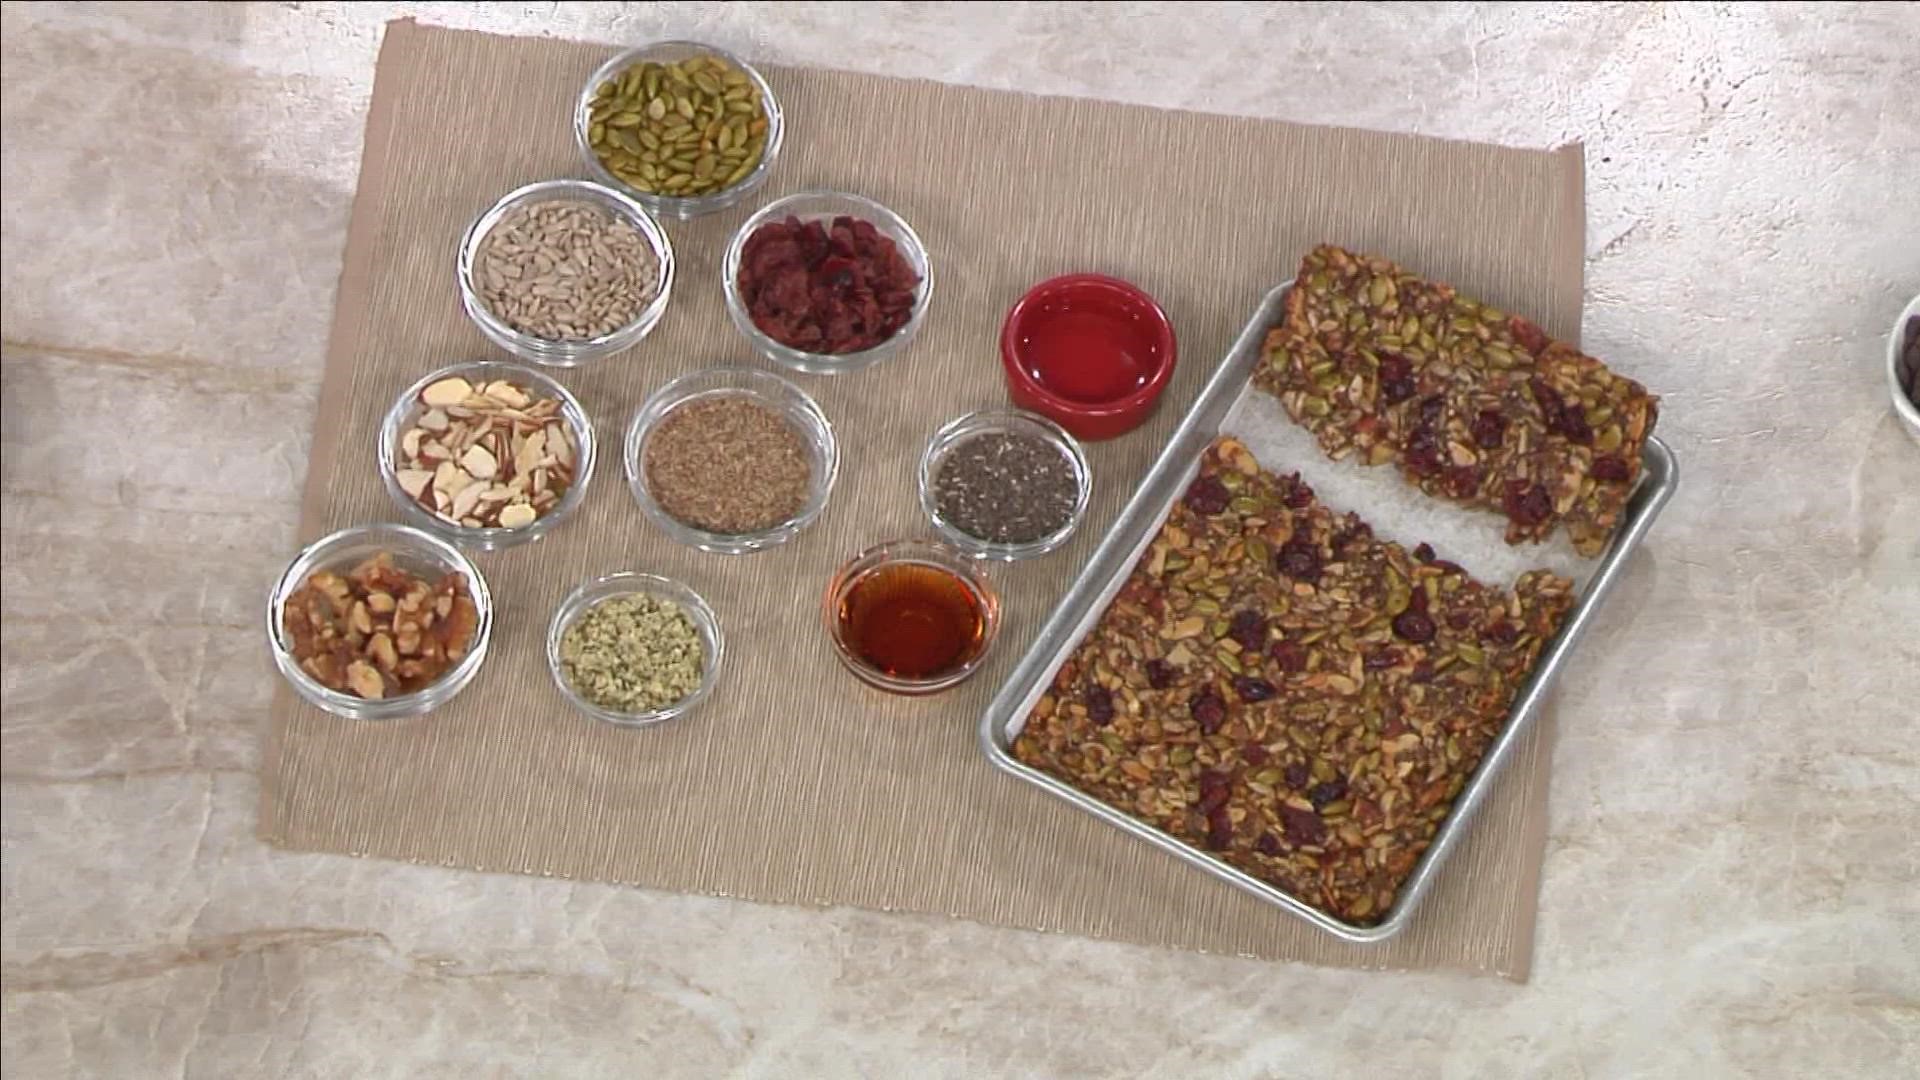 9NEWS Nutrition Expert, Malena Perdomo, provides tips for healthy snacking using nuts and seeds.